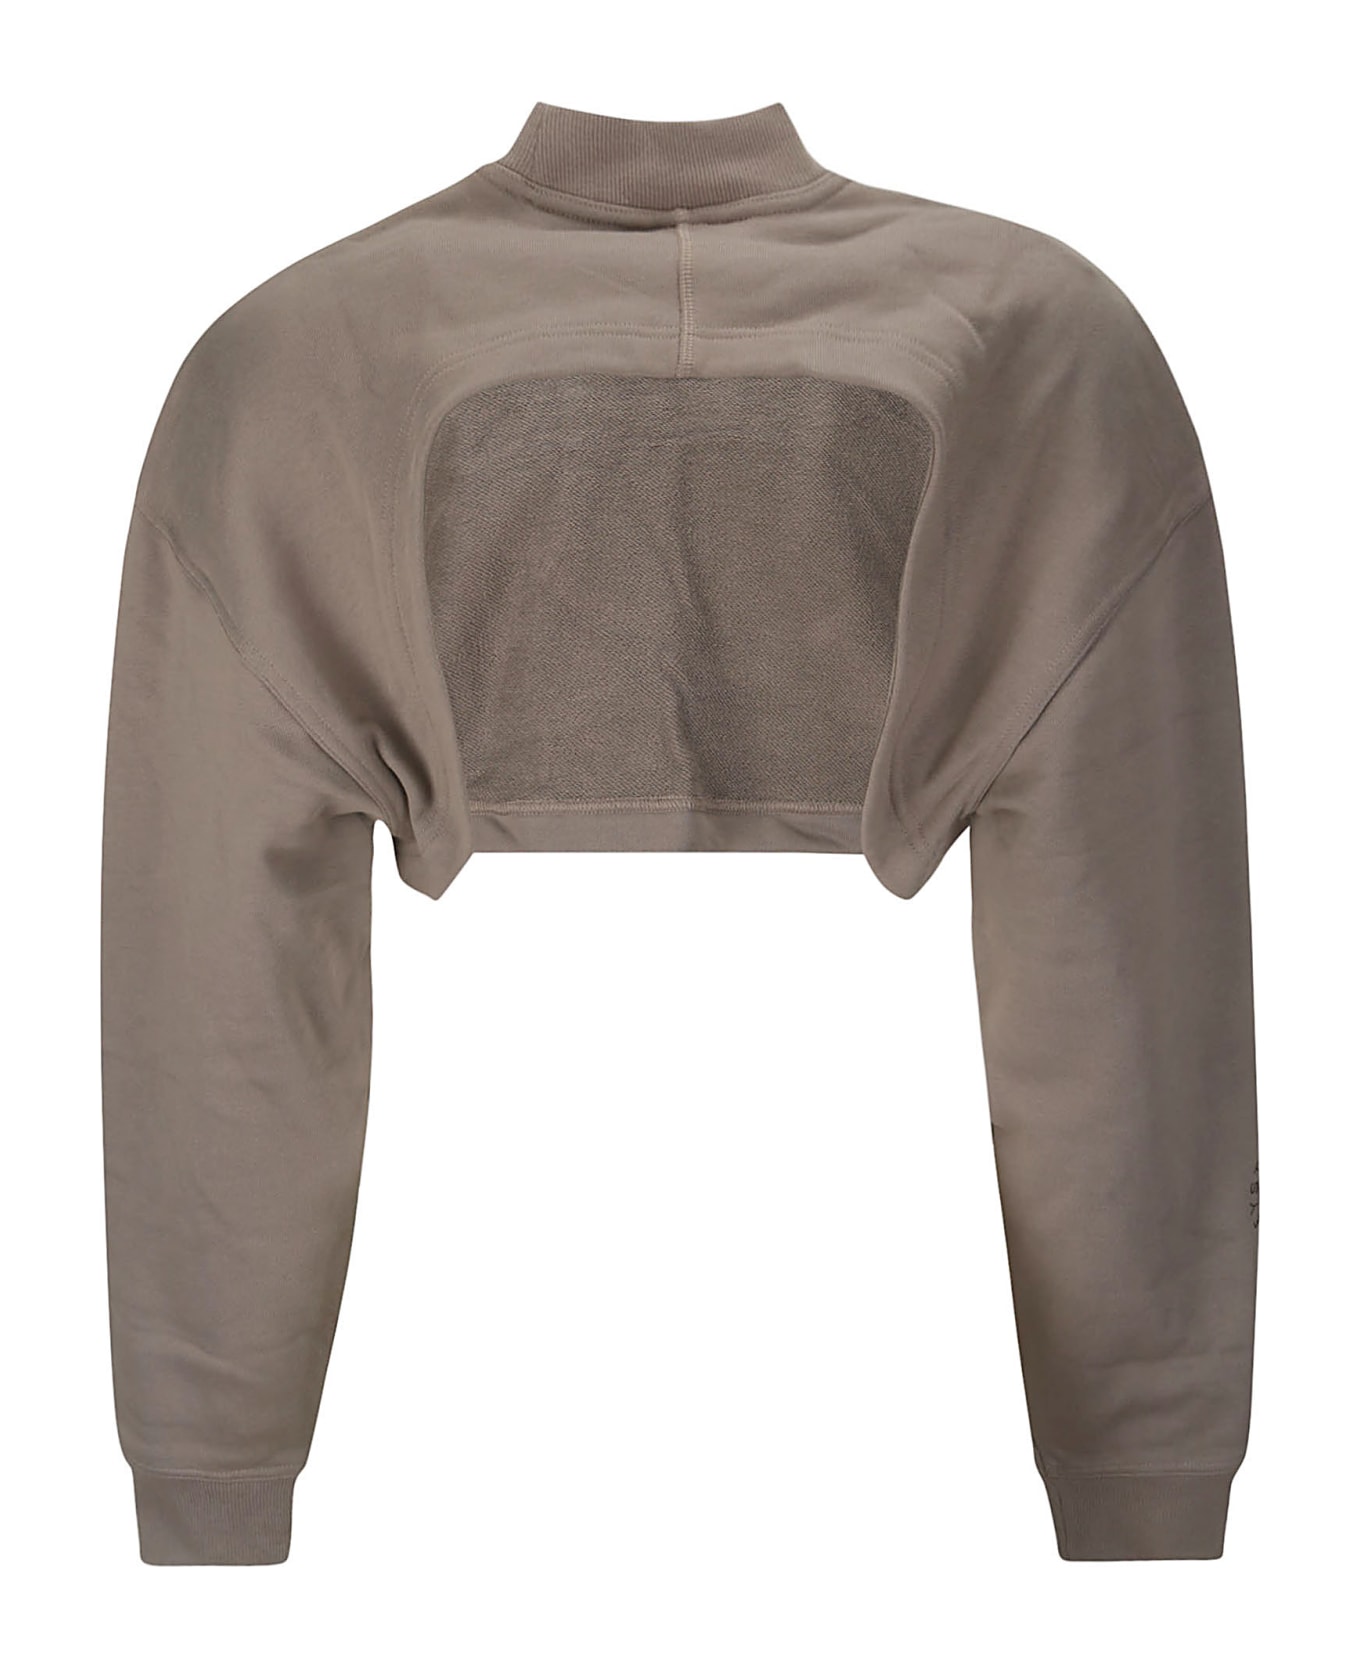 Adidas by Stella McCartney Truecasuals Cut Out Detailed Cropped Sweatshirt - TECH EARTH